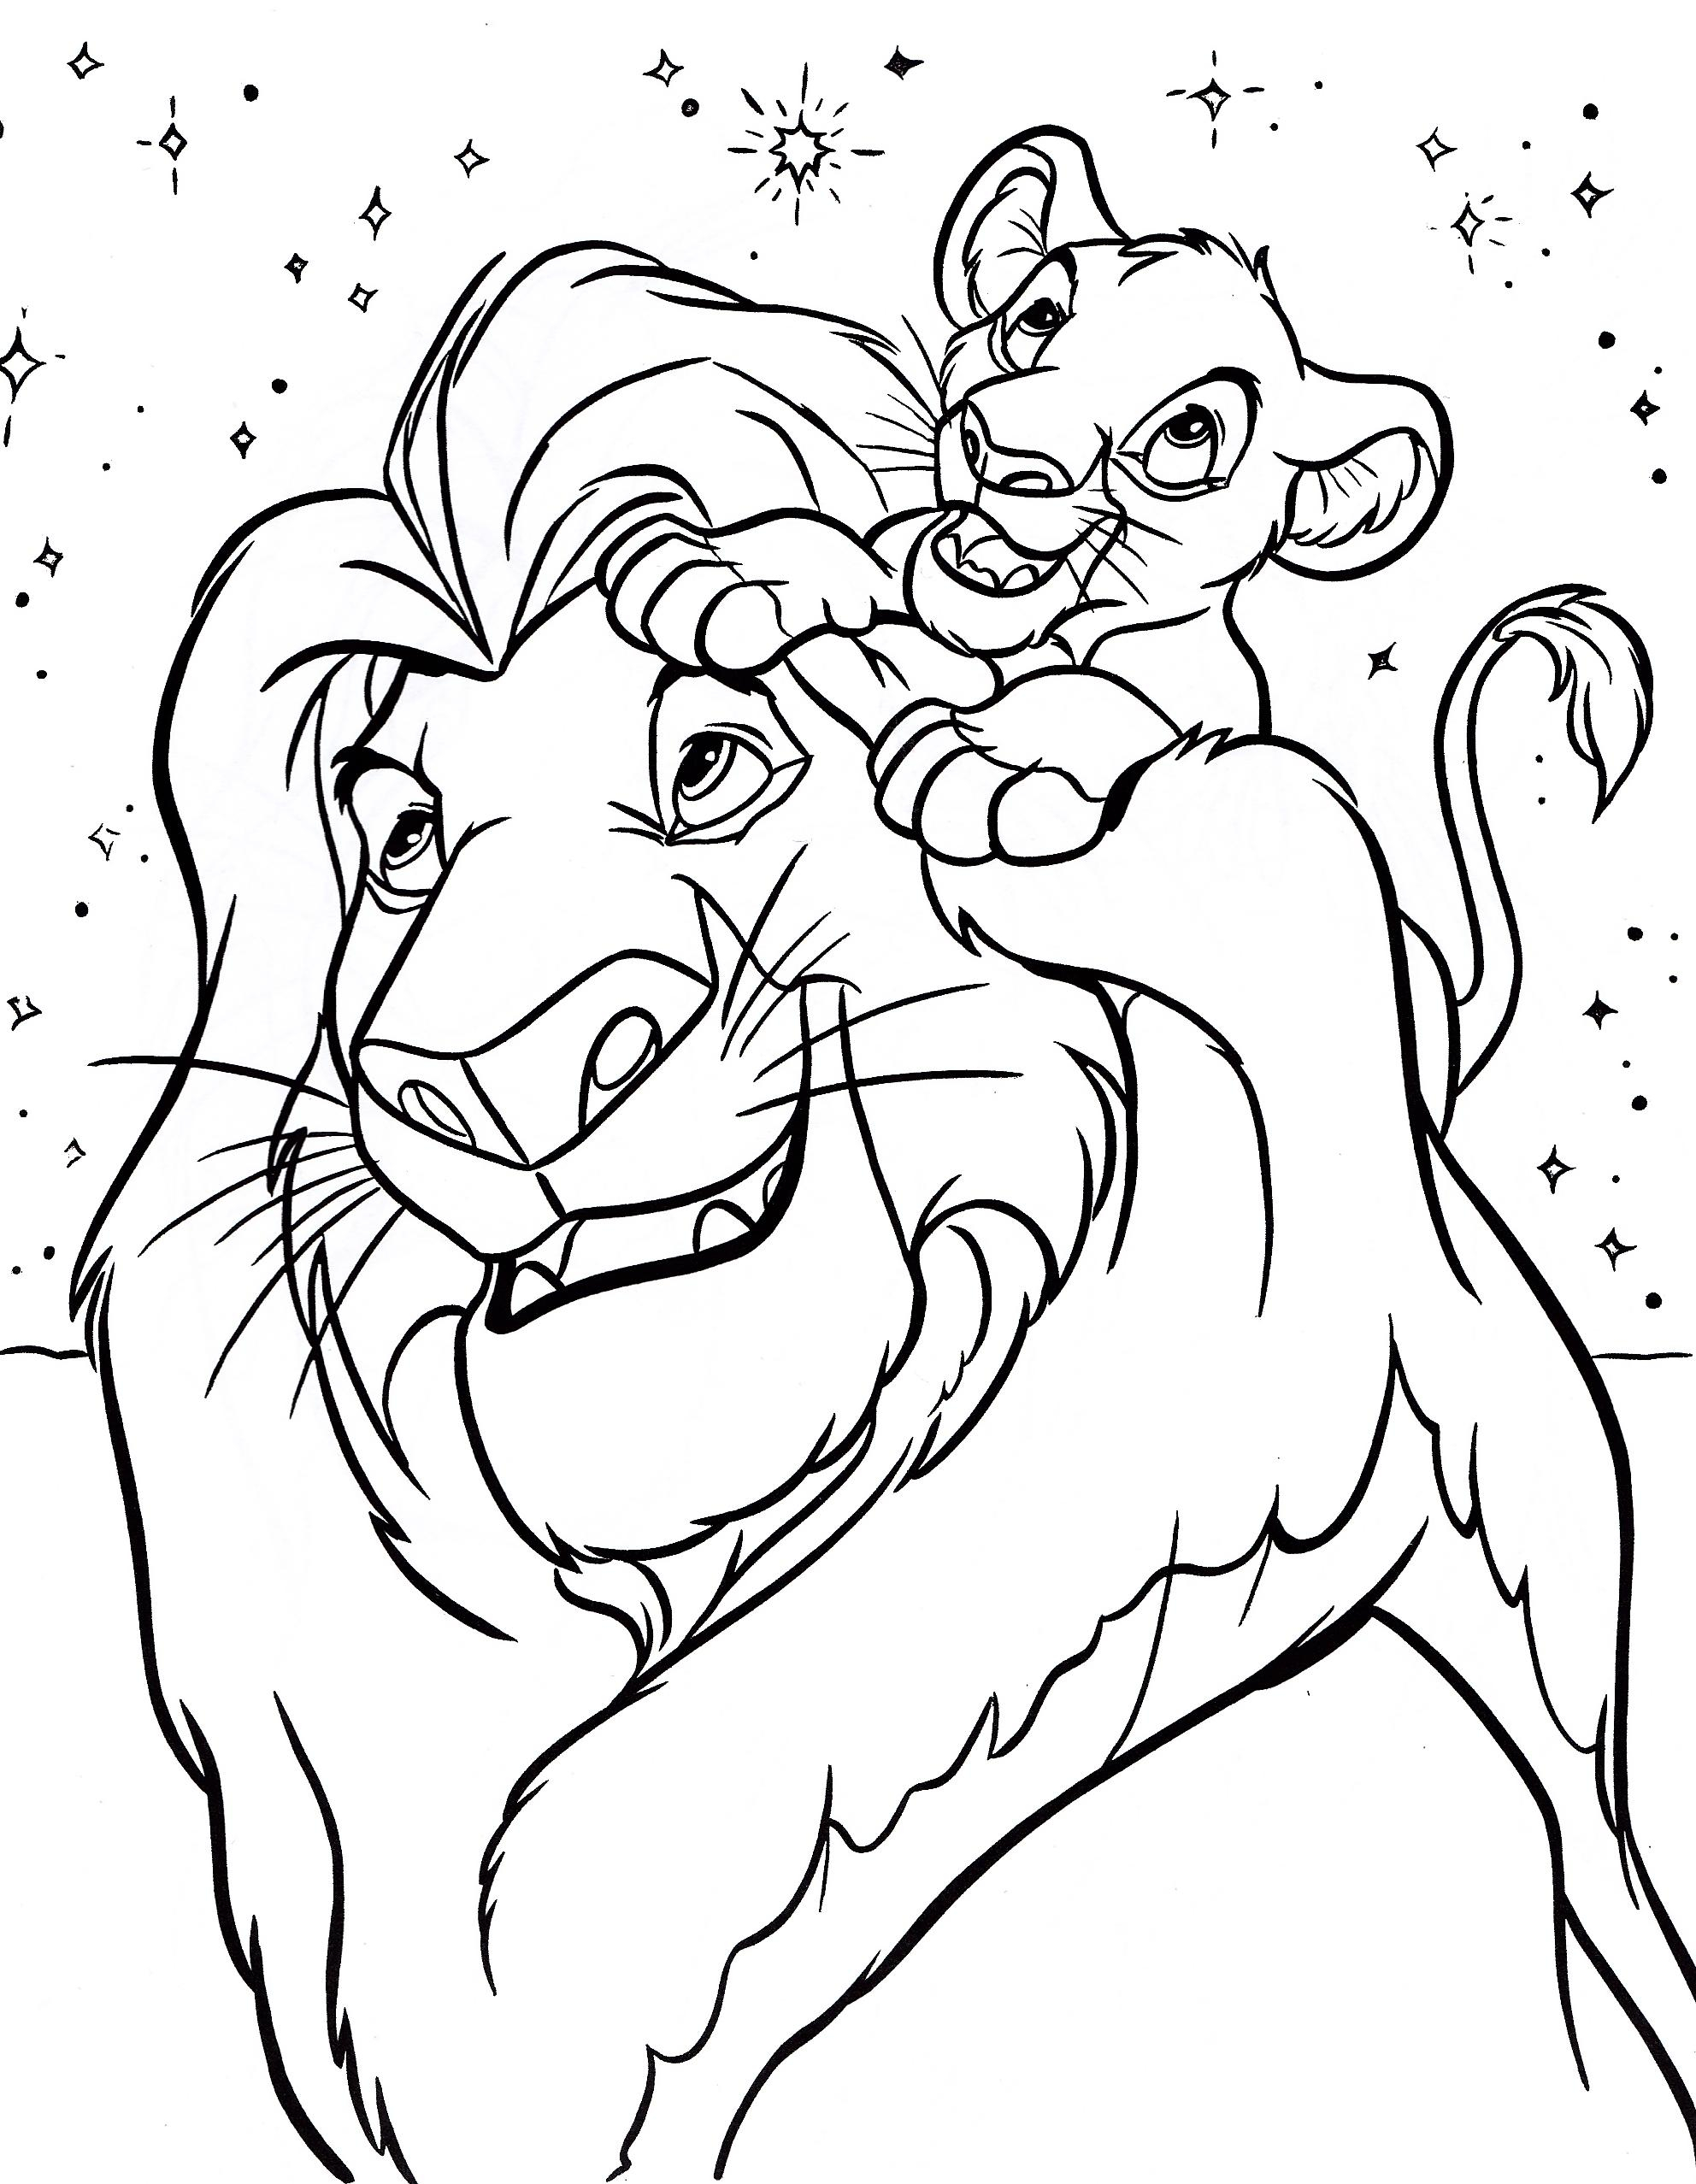 Coloring Disney Pages Disney Coloring Pages Best Coloring Pages For Kids